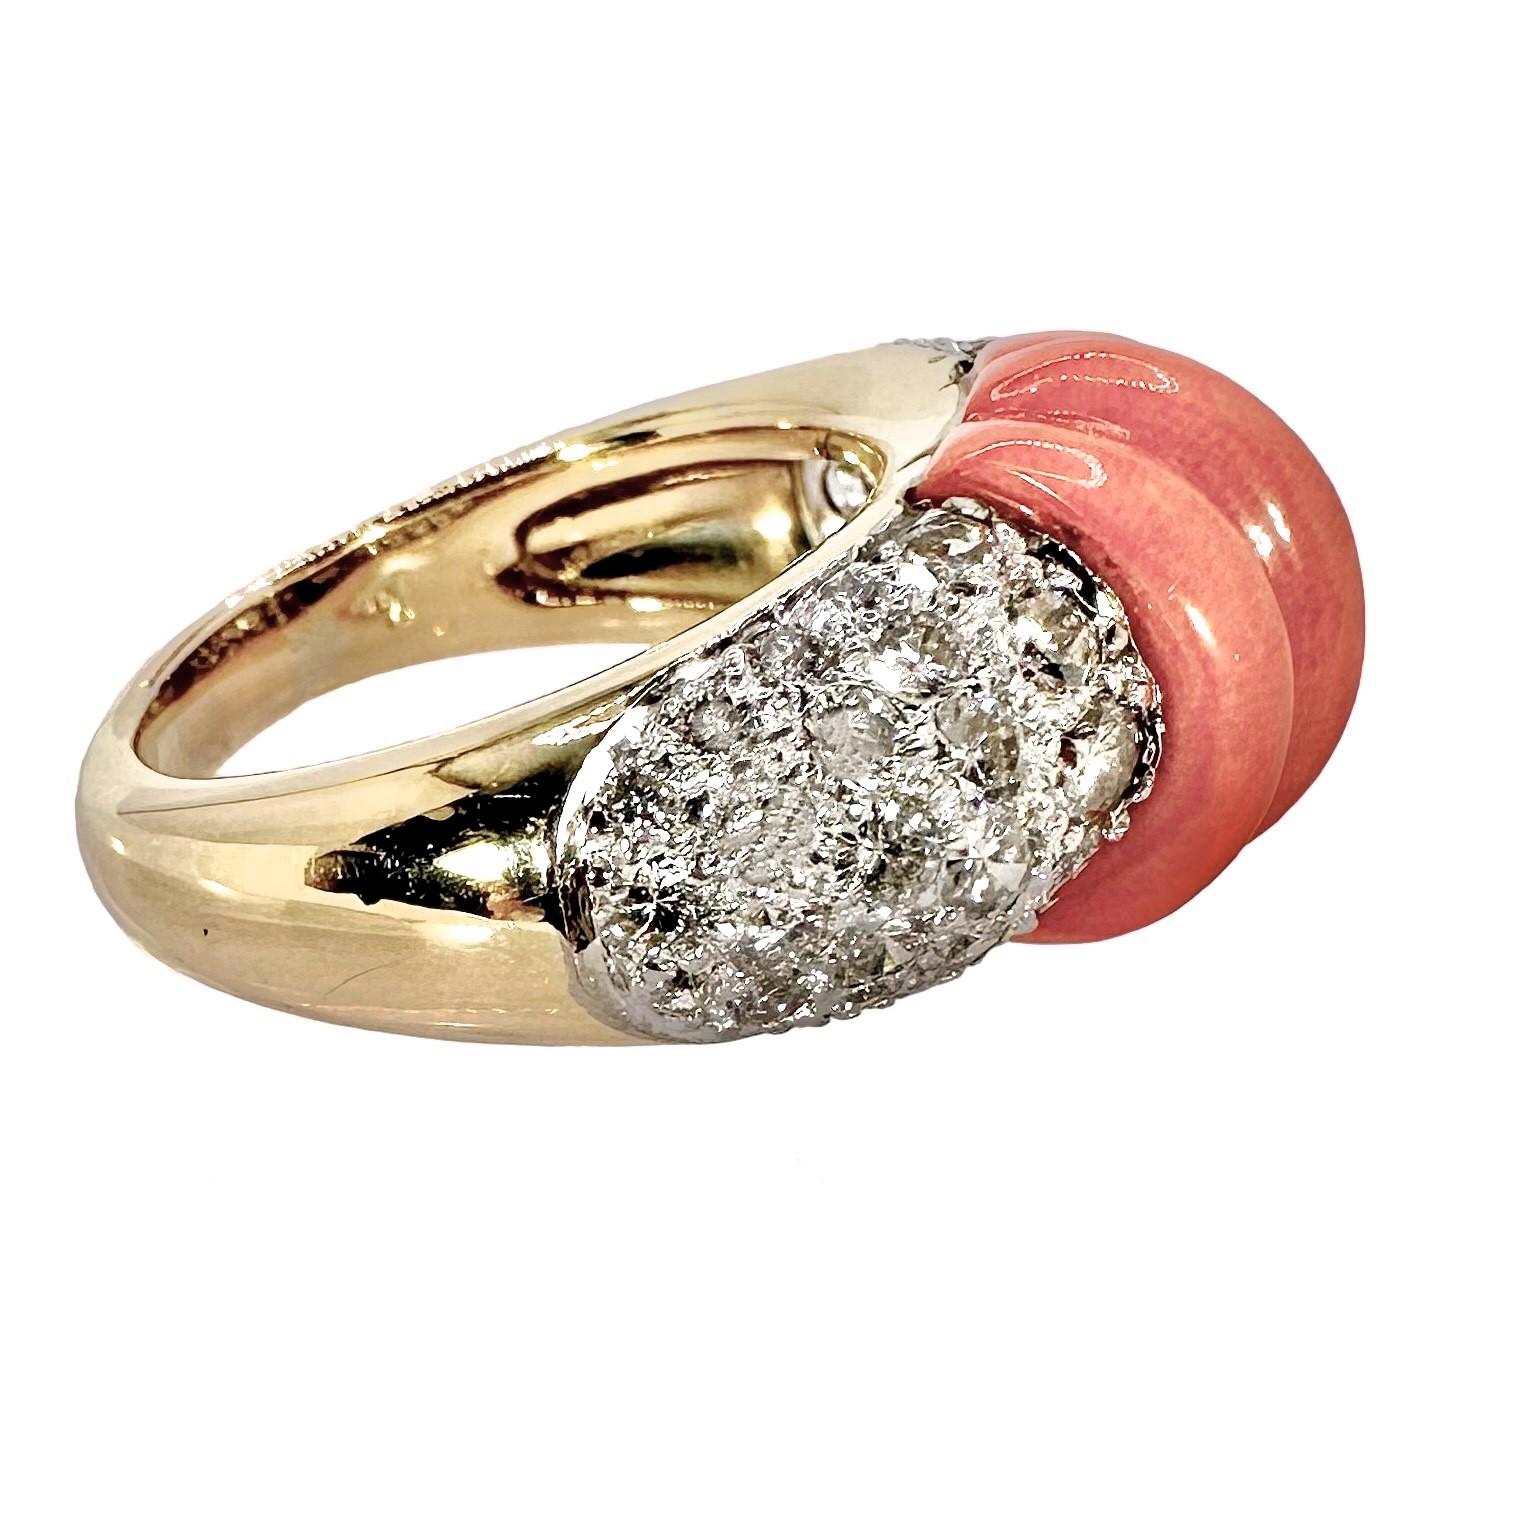 Brilliant Cut Vintage Kutchinsky 18k Yellow Gold, Diamond and Fluted Coral Cocktail Ring * For Sale